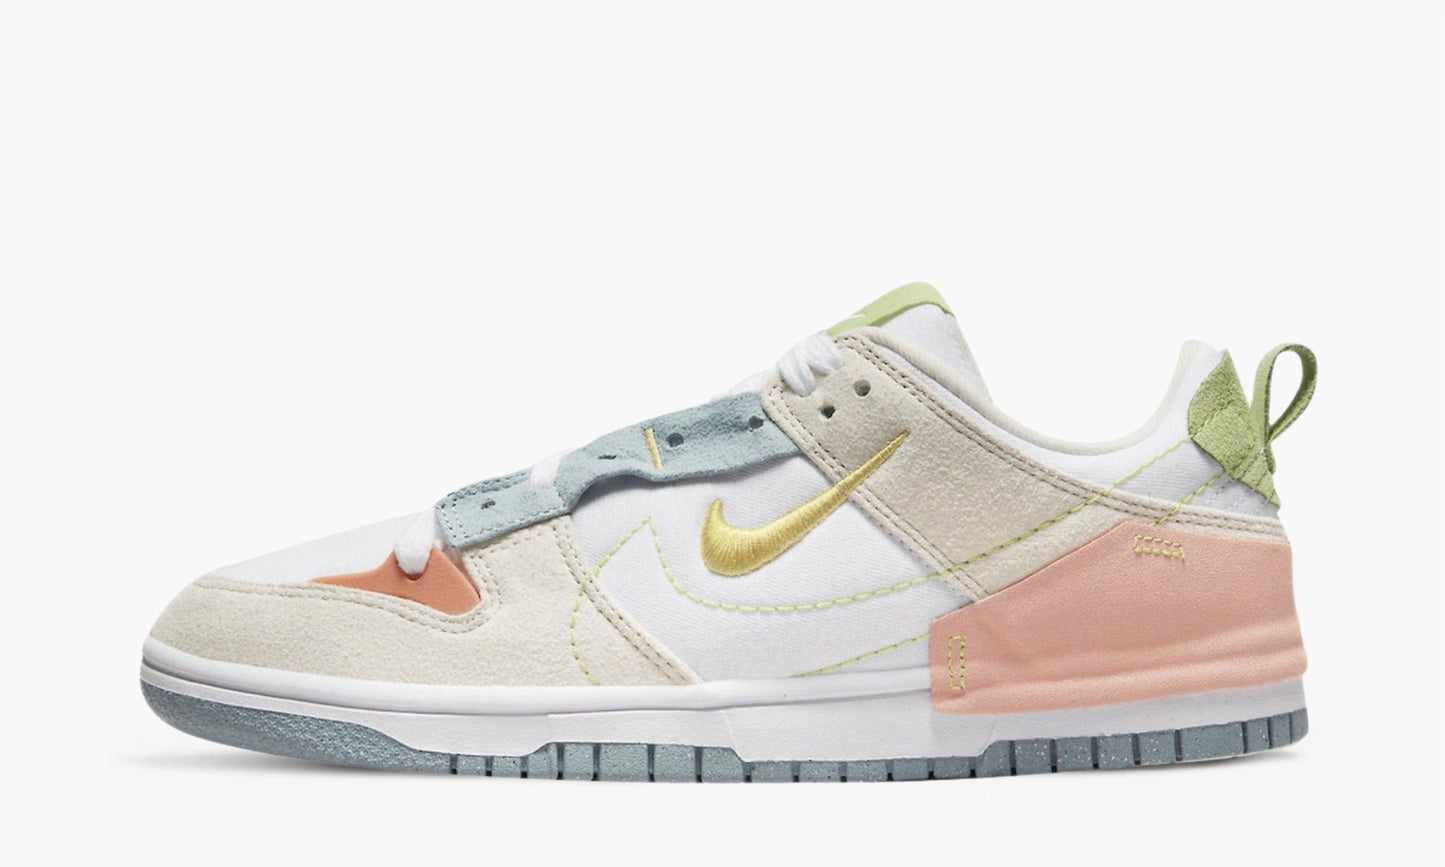 Dunk Low Disrupt 2 WMNS Easter Pastel - DV3457 100 | The Sortage